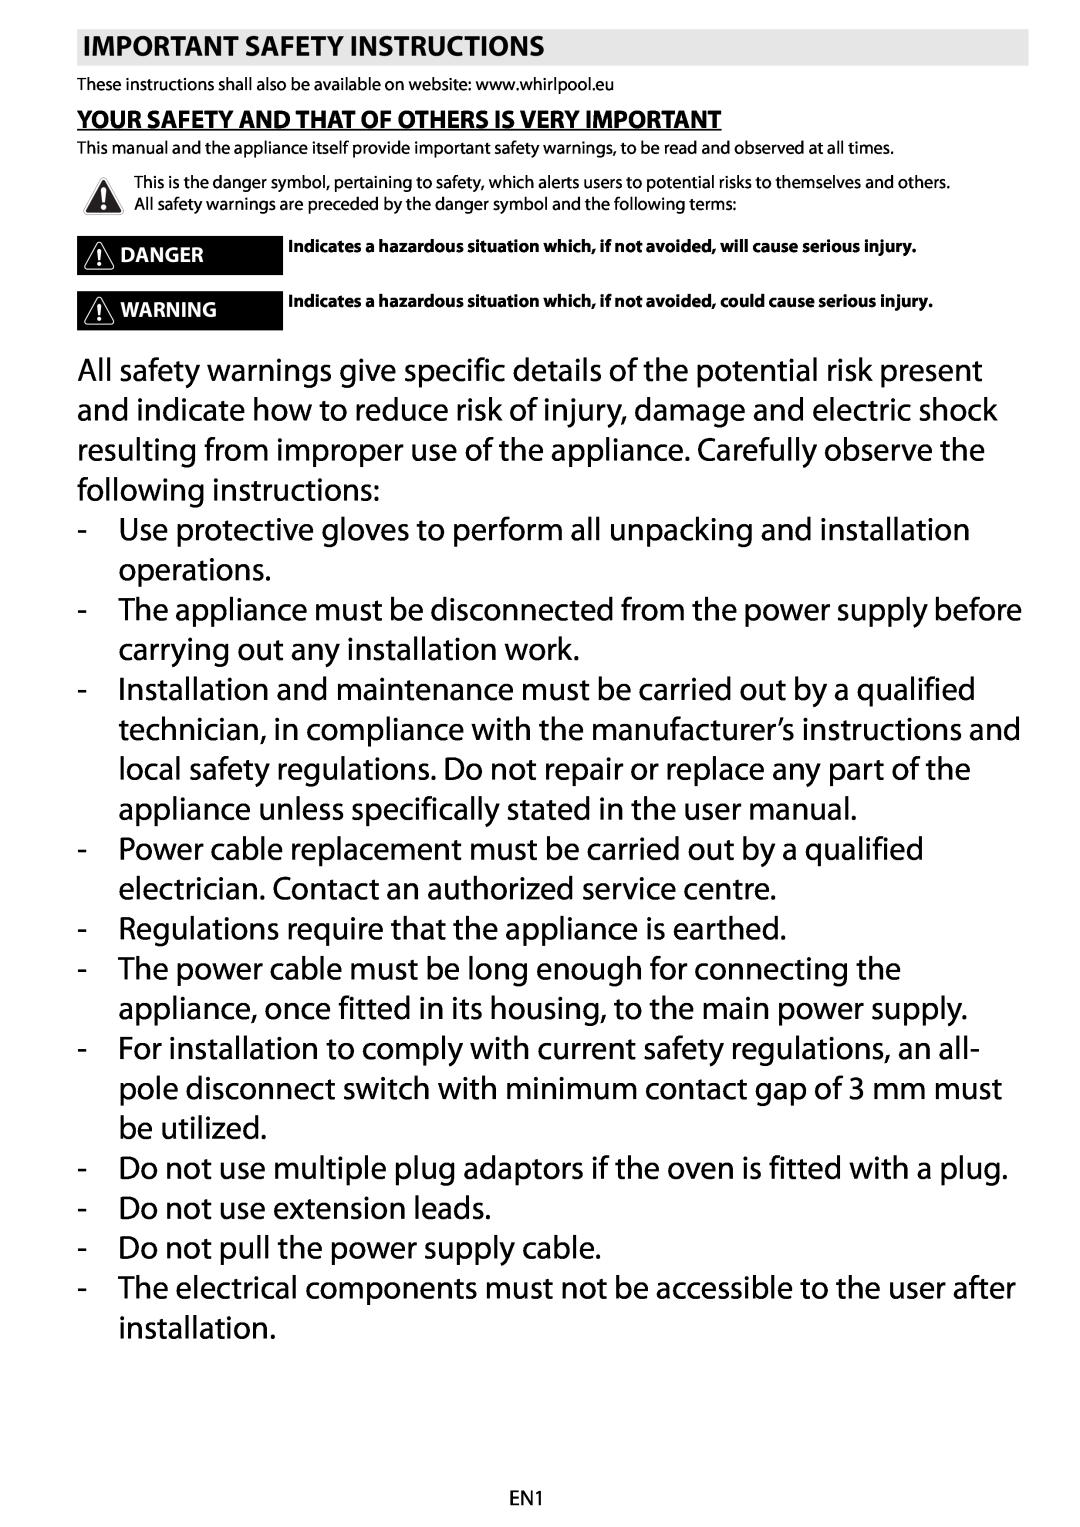 Whirlpool AKZ 561 manual Regulations require that the appliance is earthed 